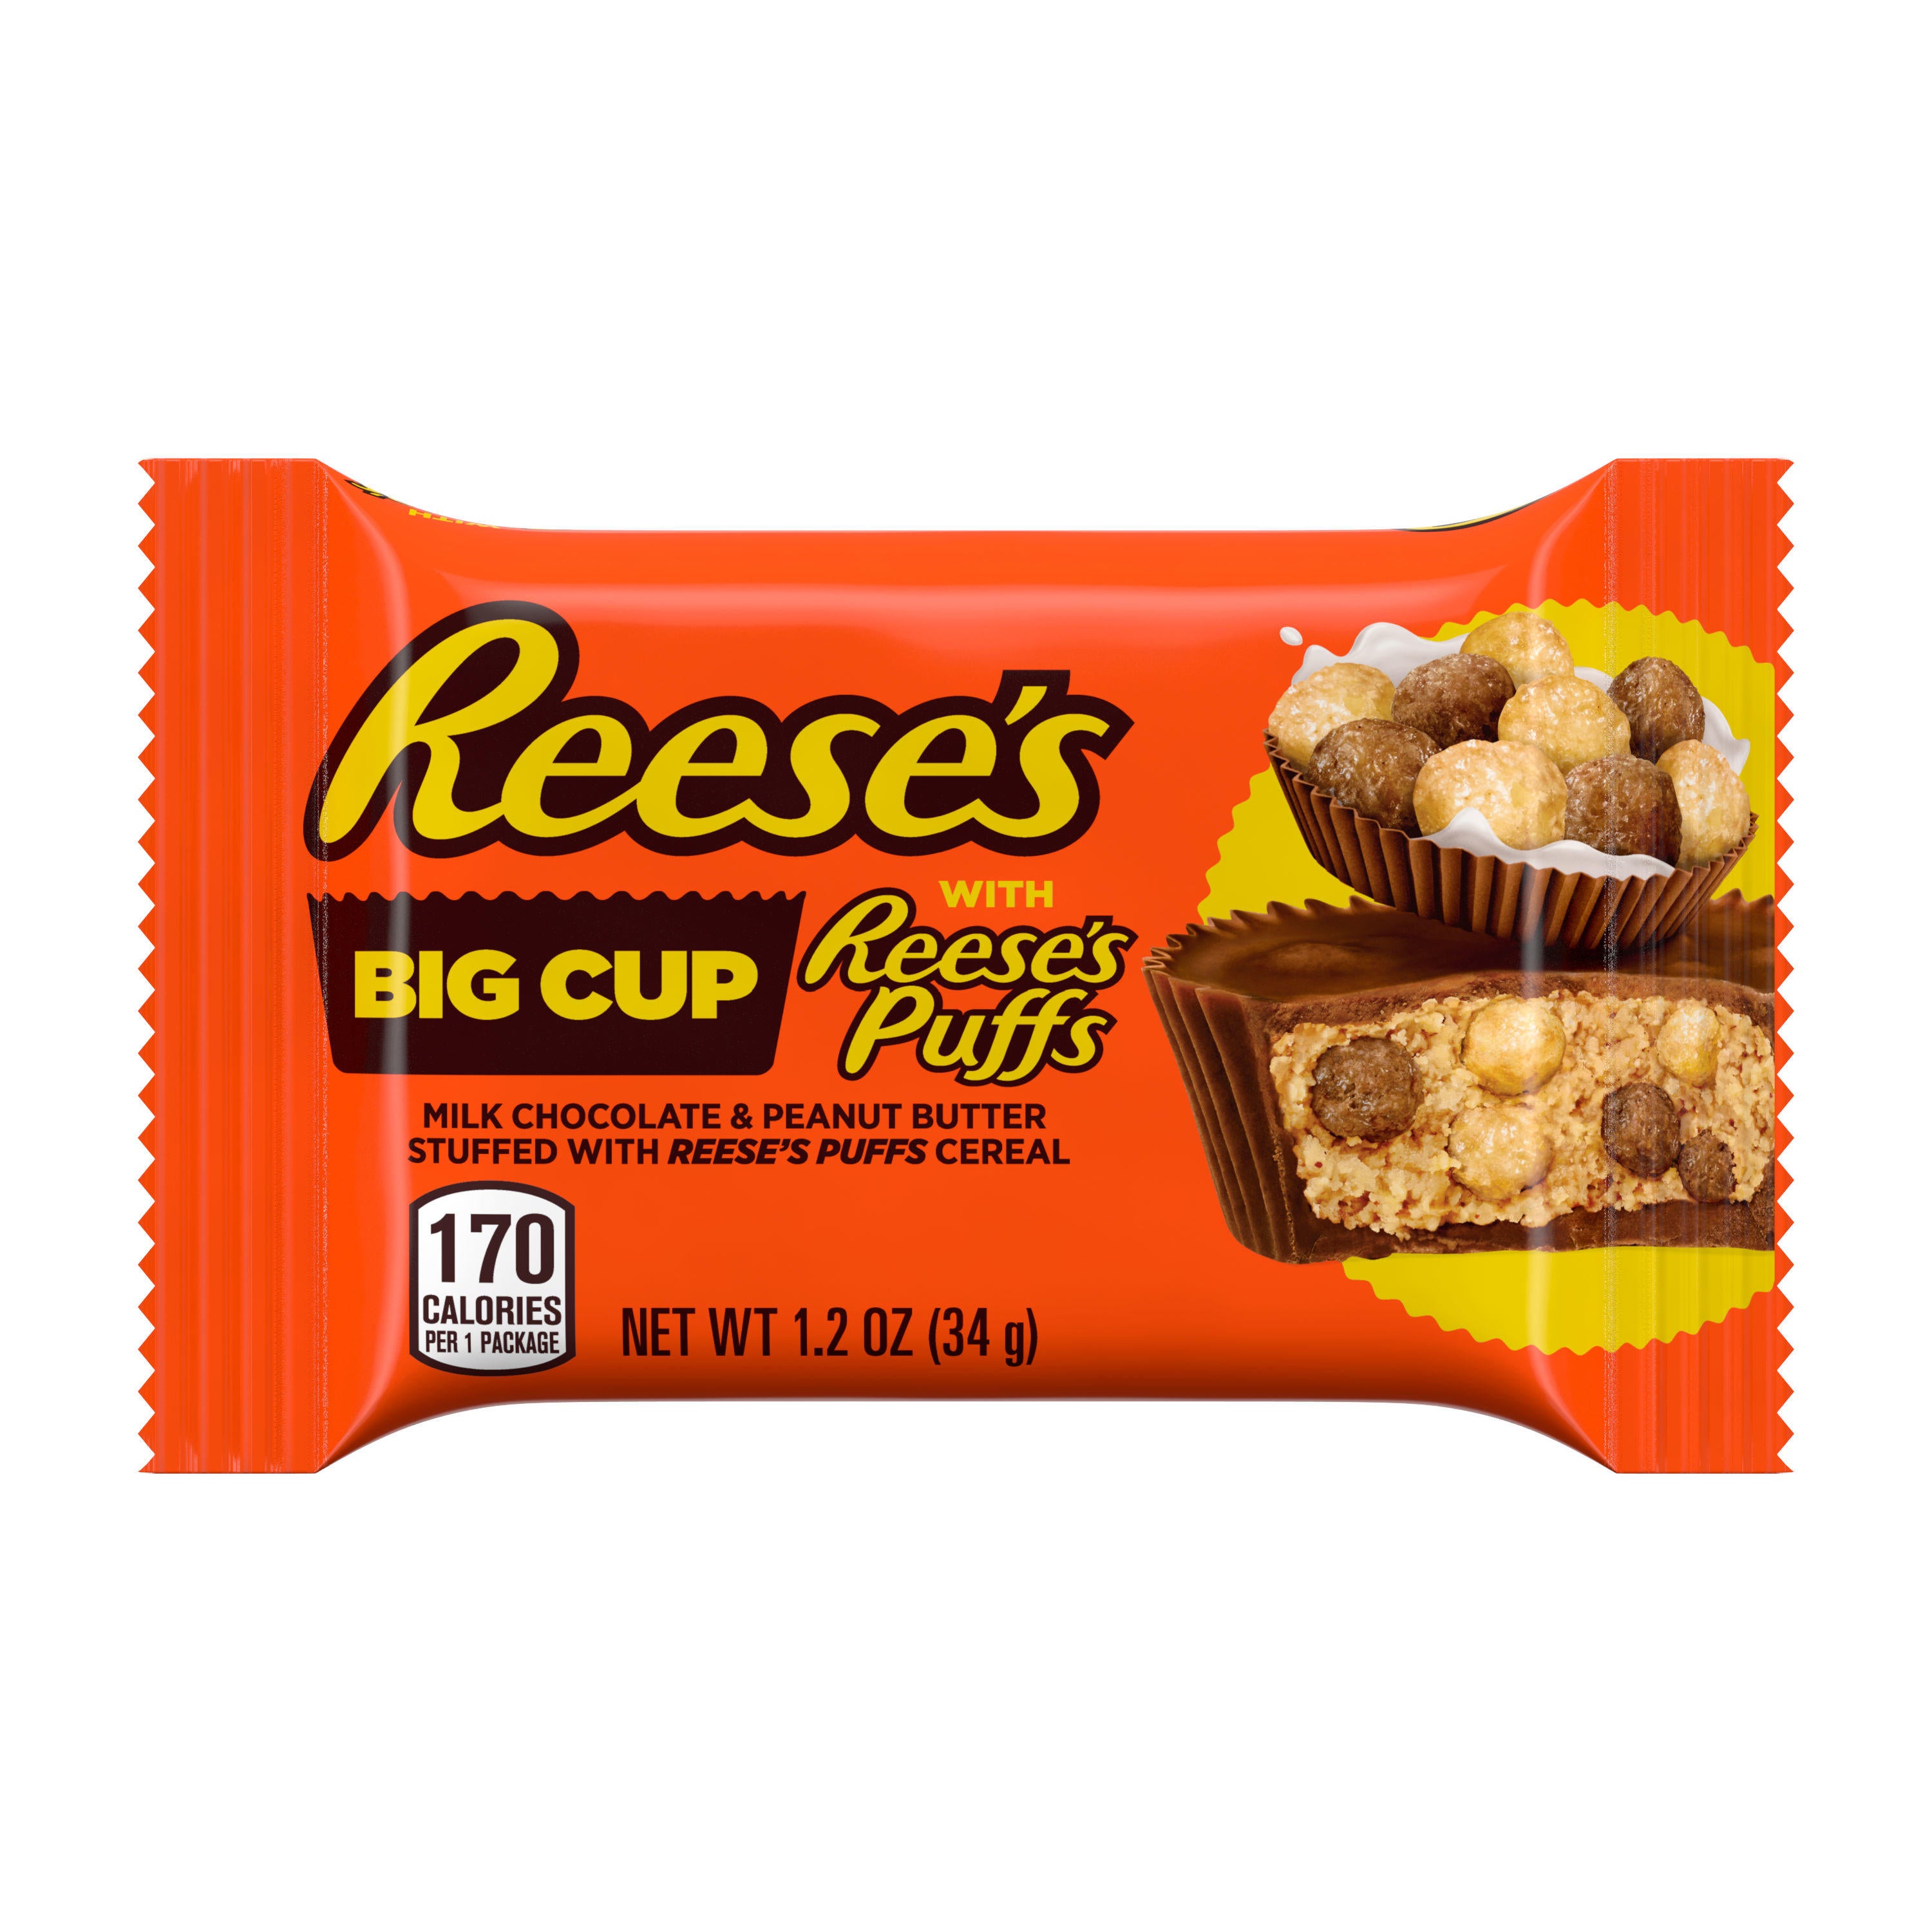 reeses-big-cup-stuffed-with-reeses-puffs-cereal